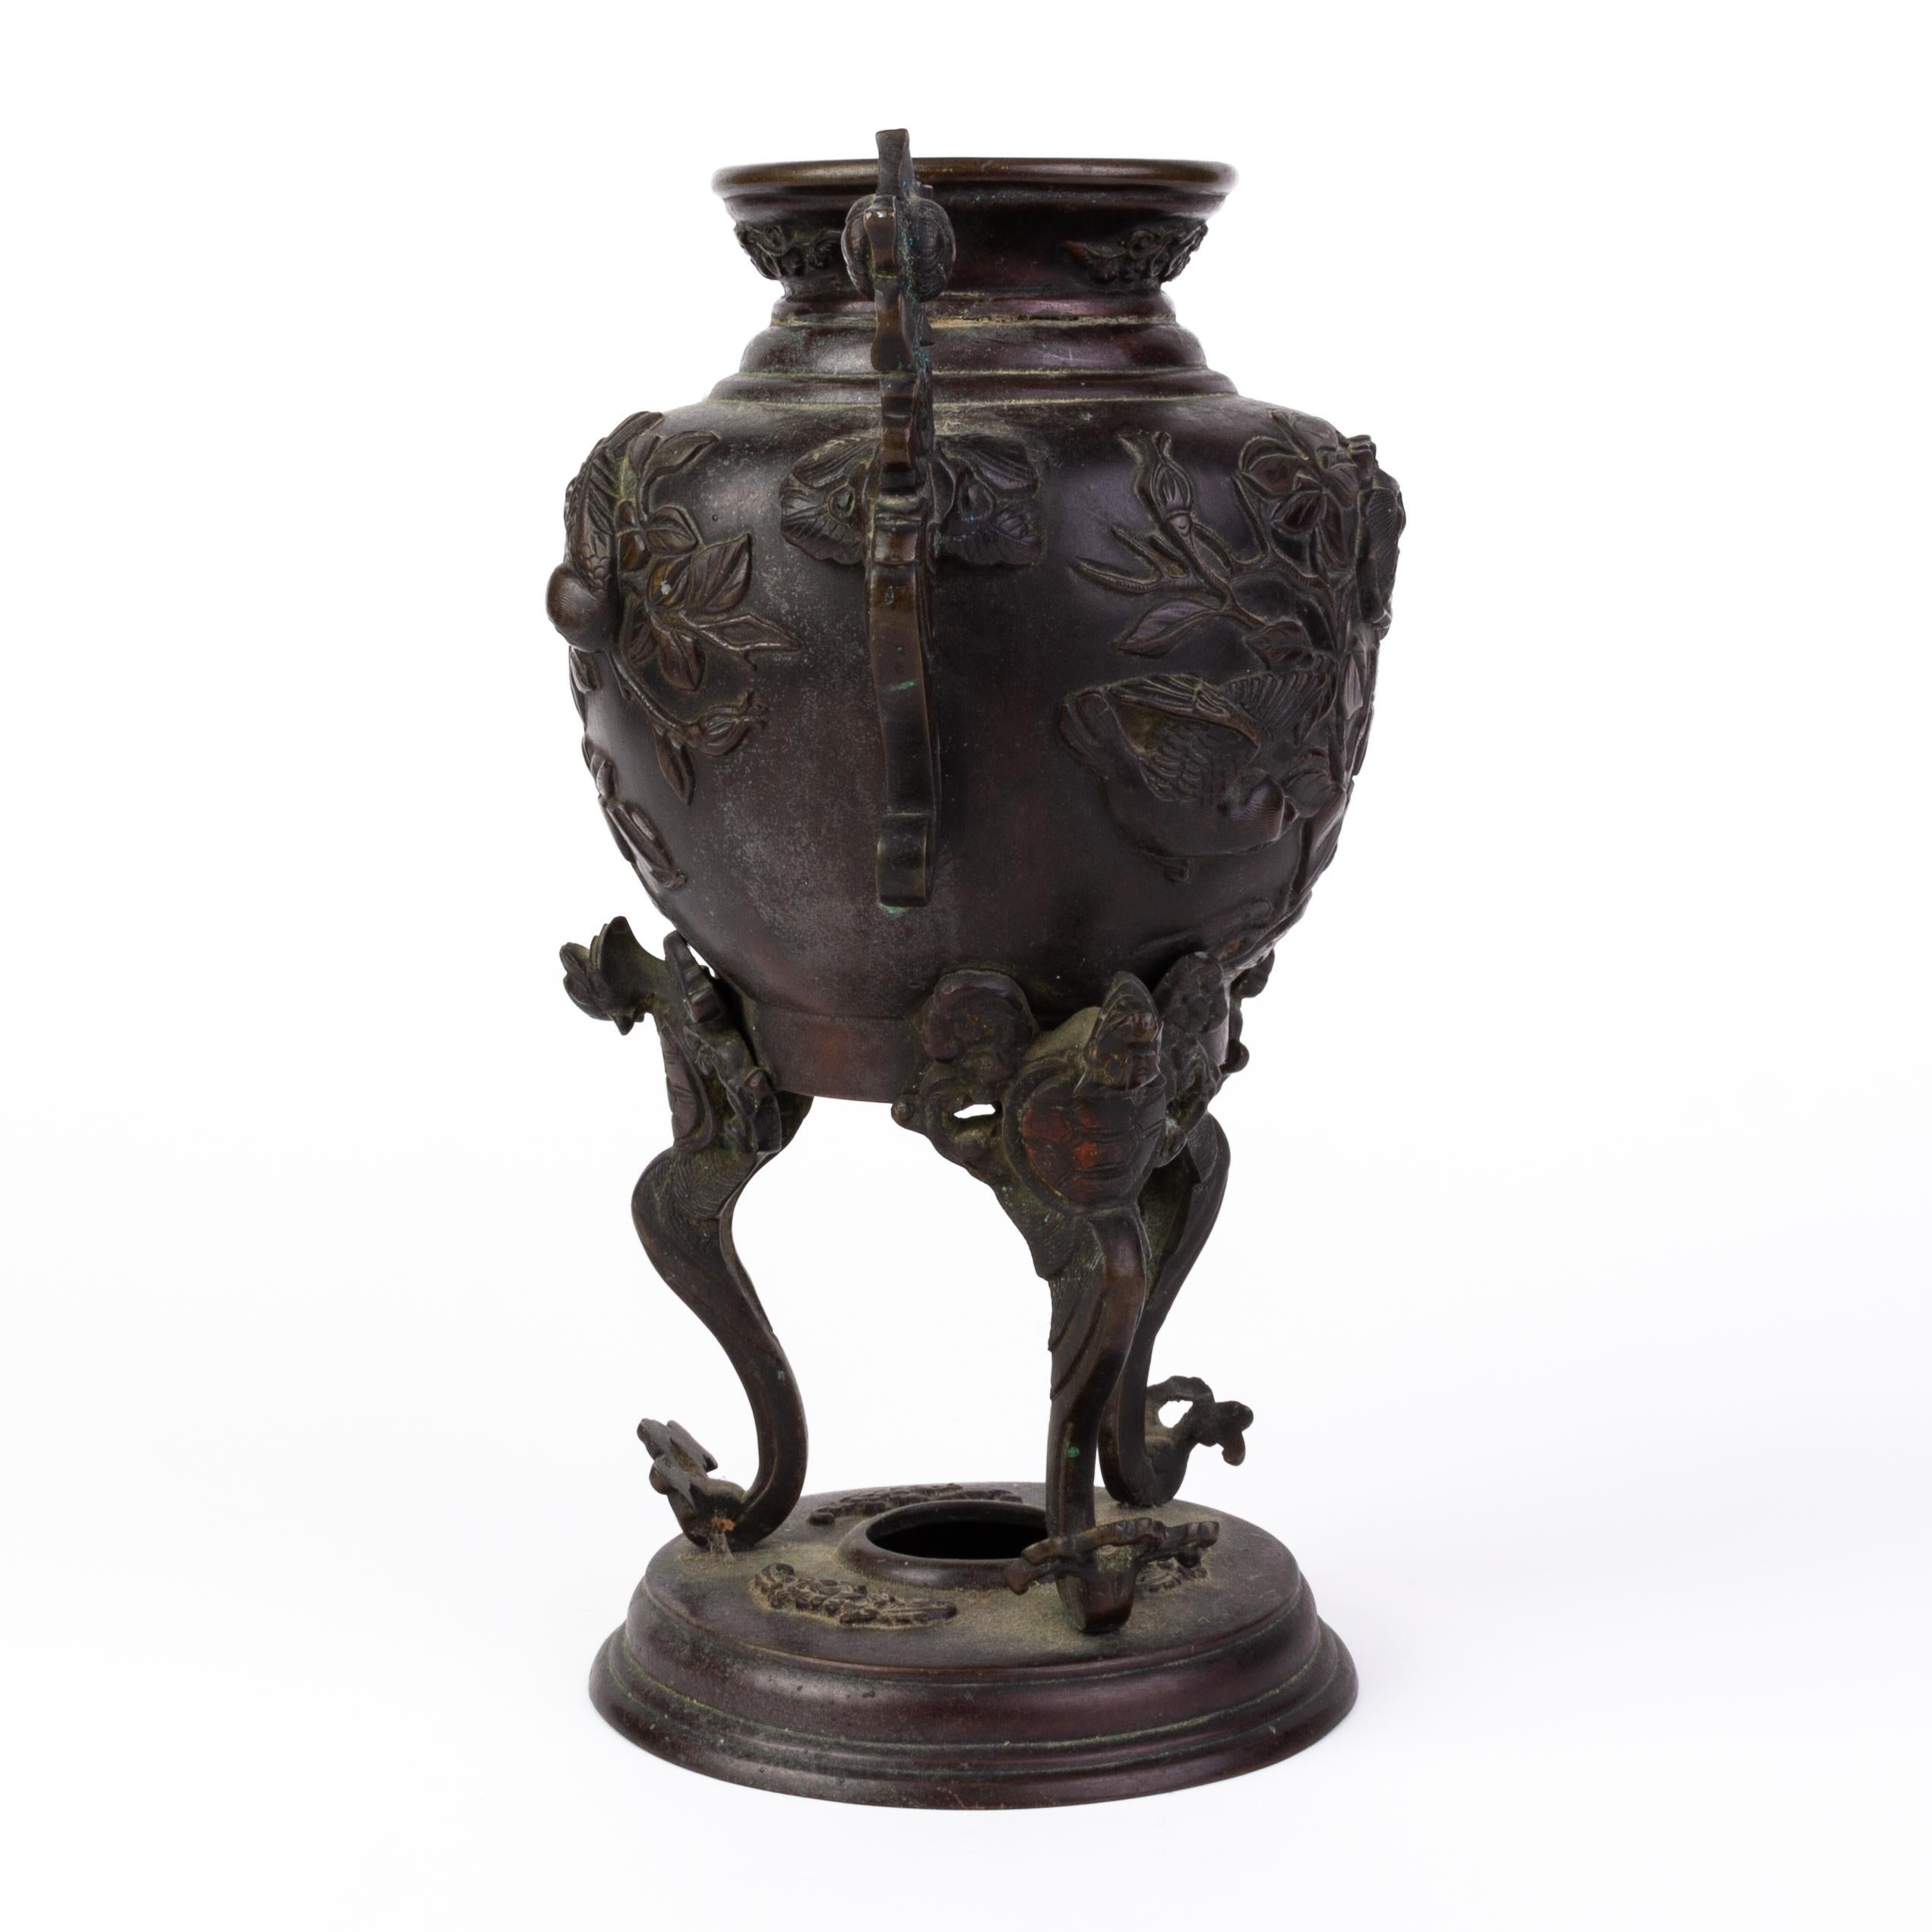 Late 19th century Japanese bronze censer vase.
From a private collection.
Free international shipping.